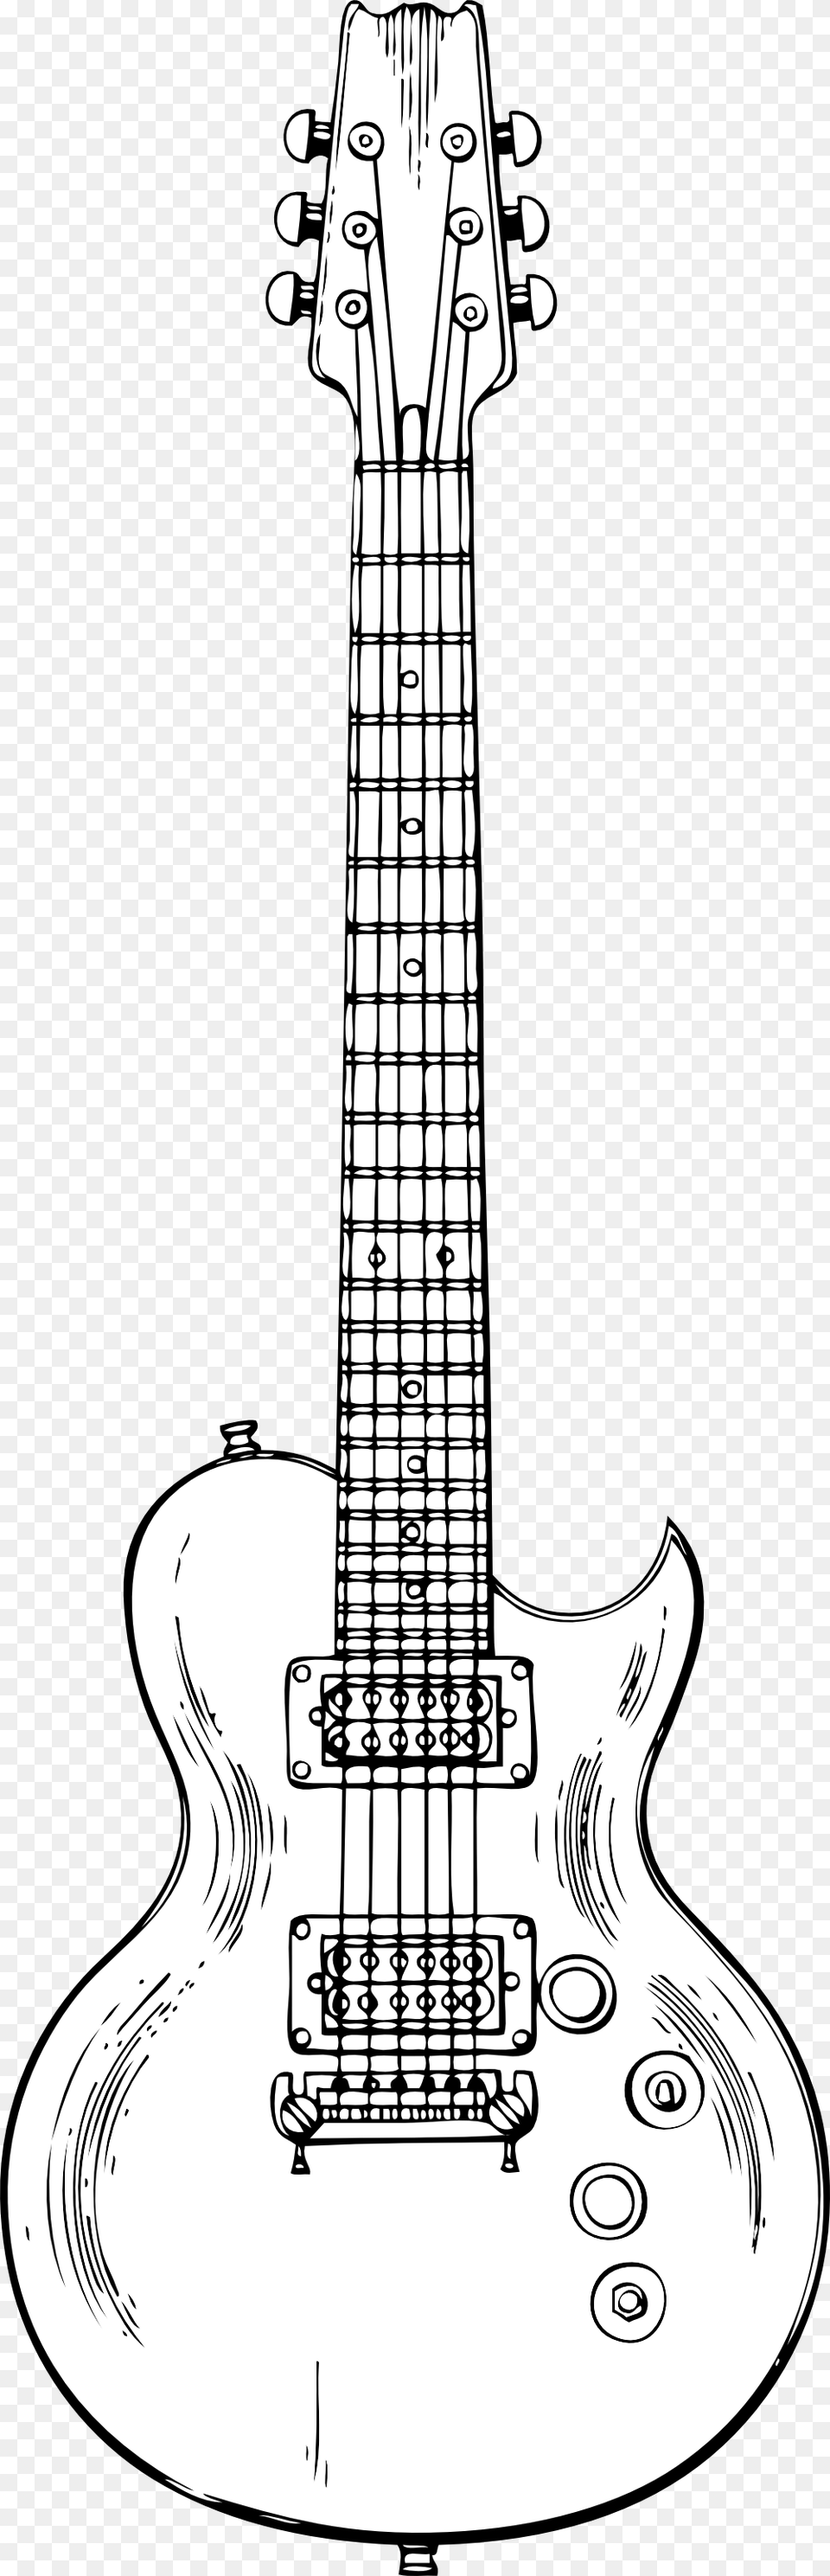 Electric Guitar Black White Line Art 999px 549 Black And White Guitar, Musical Instrument, Bass Guitar, Smoke Pipe Free Png Download